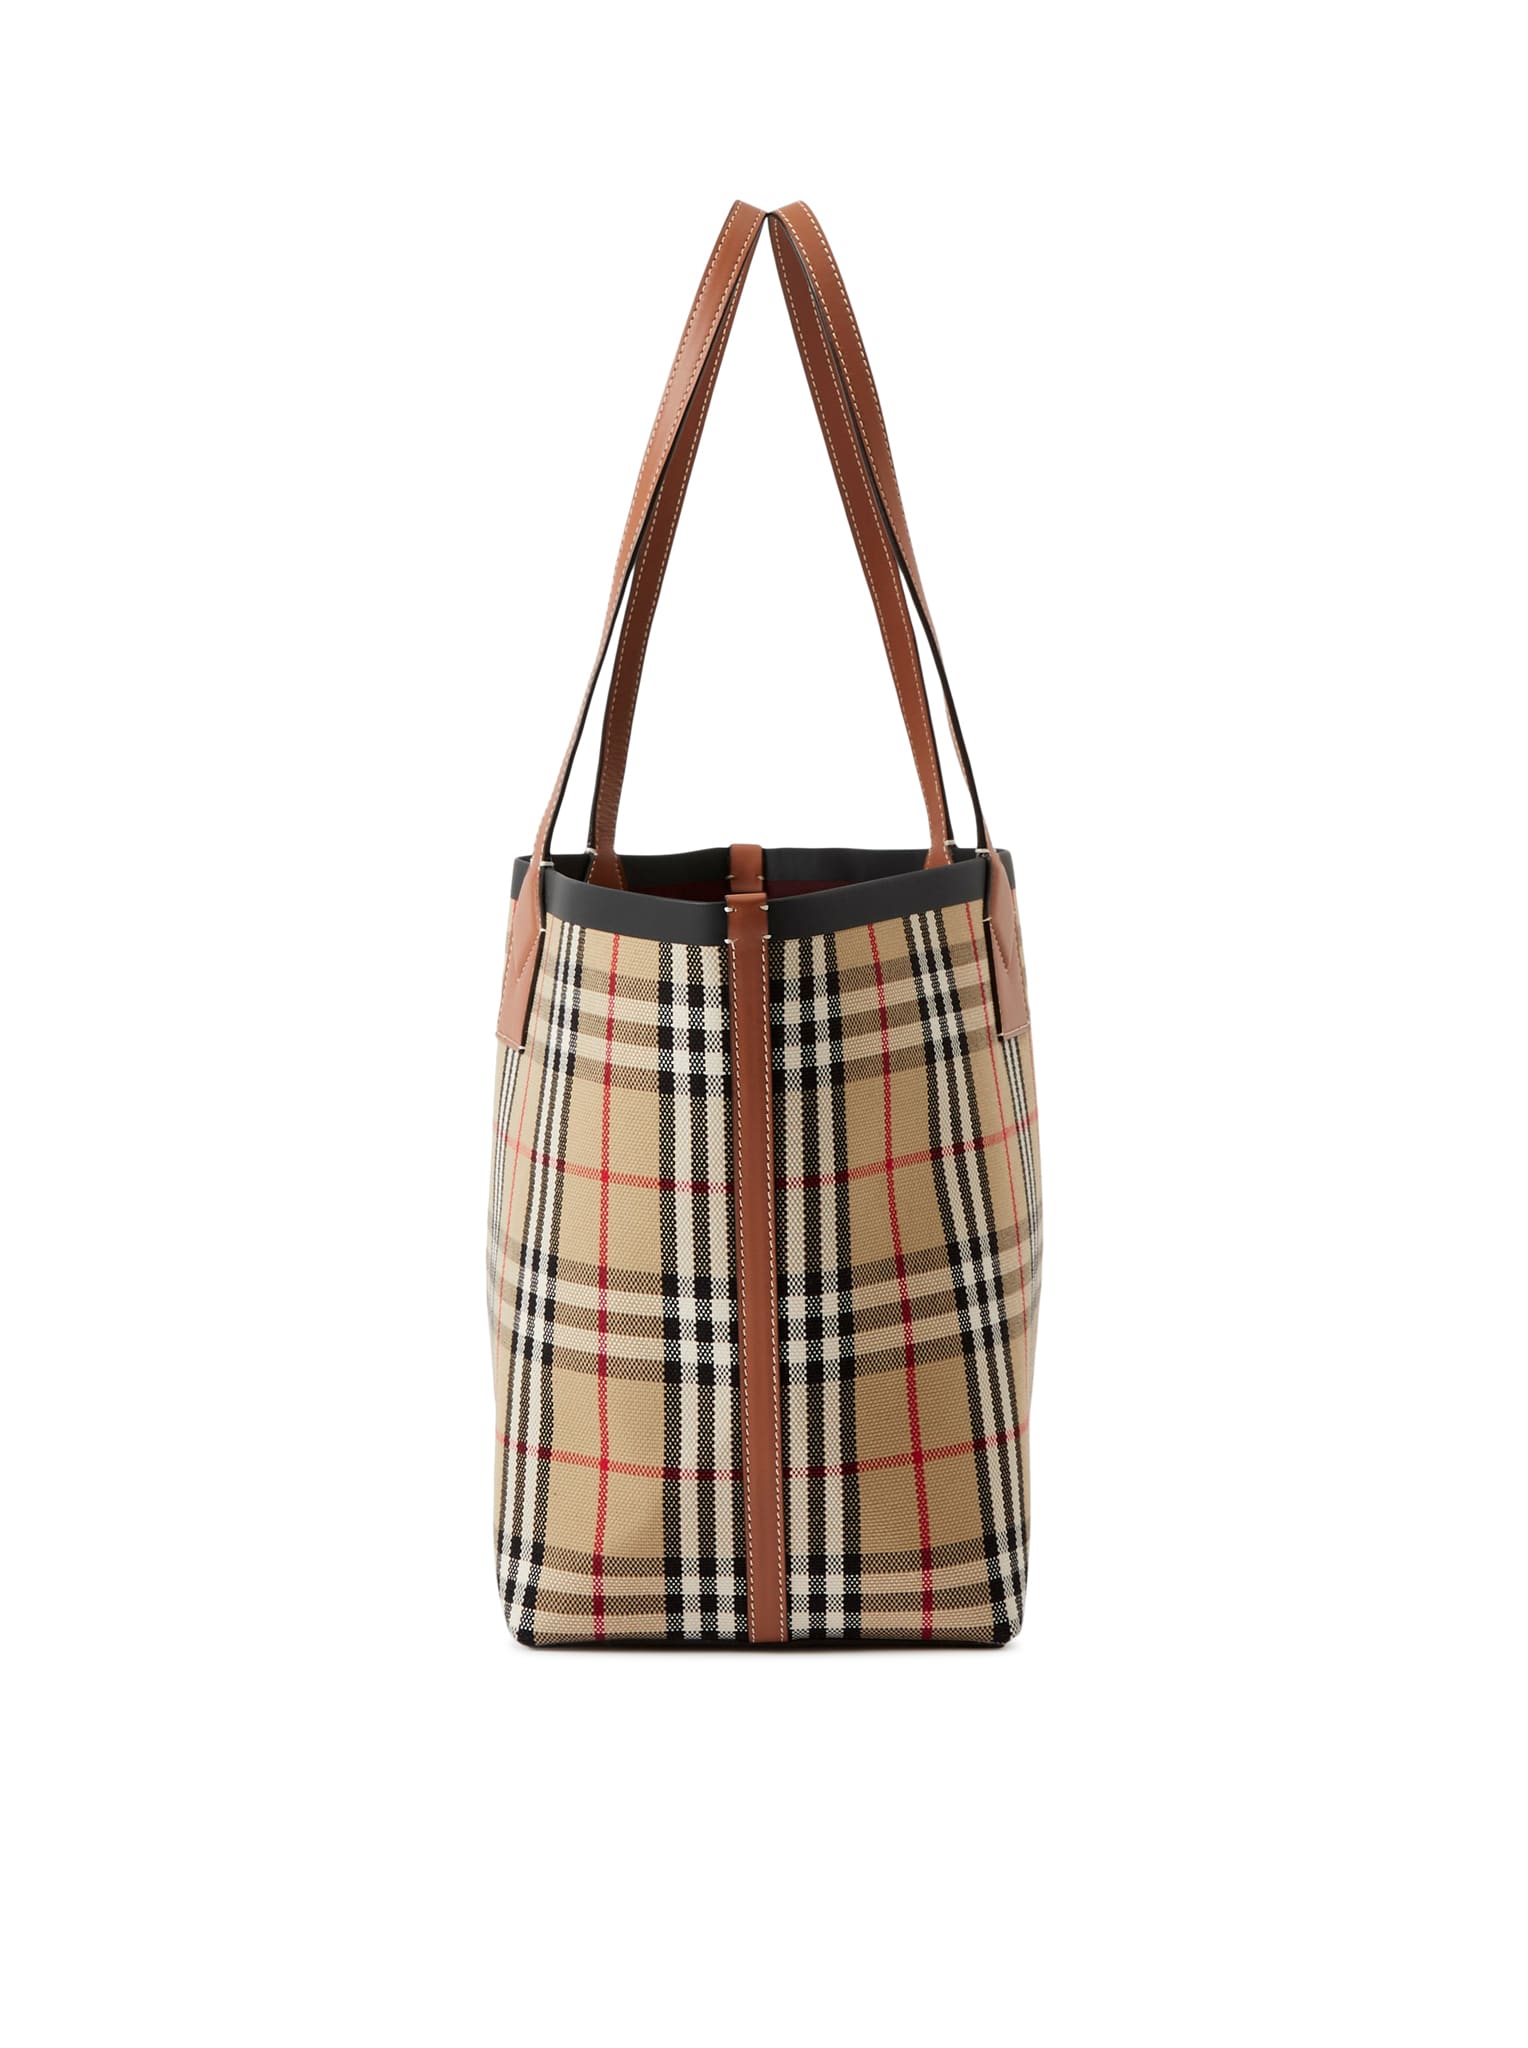 Burberry Ll Md Heritage Tote Yuc In Briar Brown Black | ModeSens